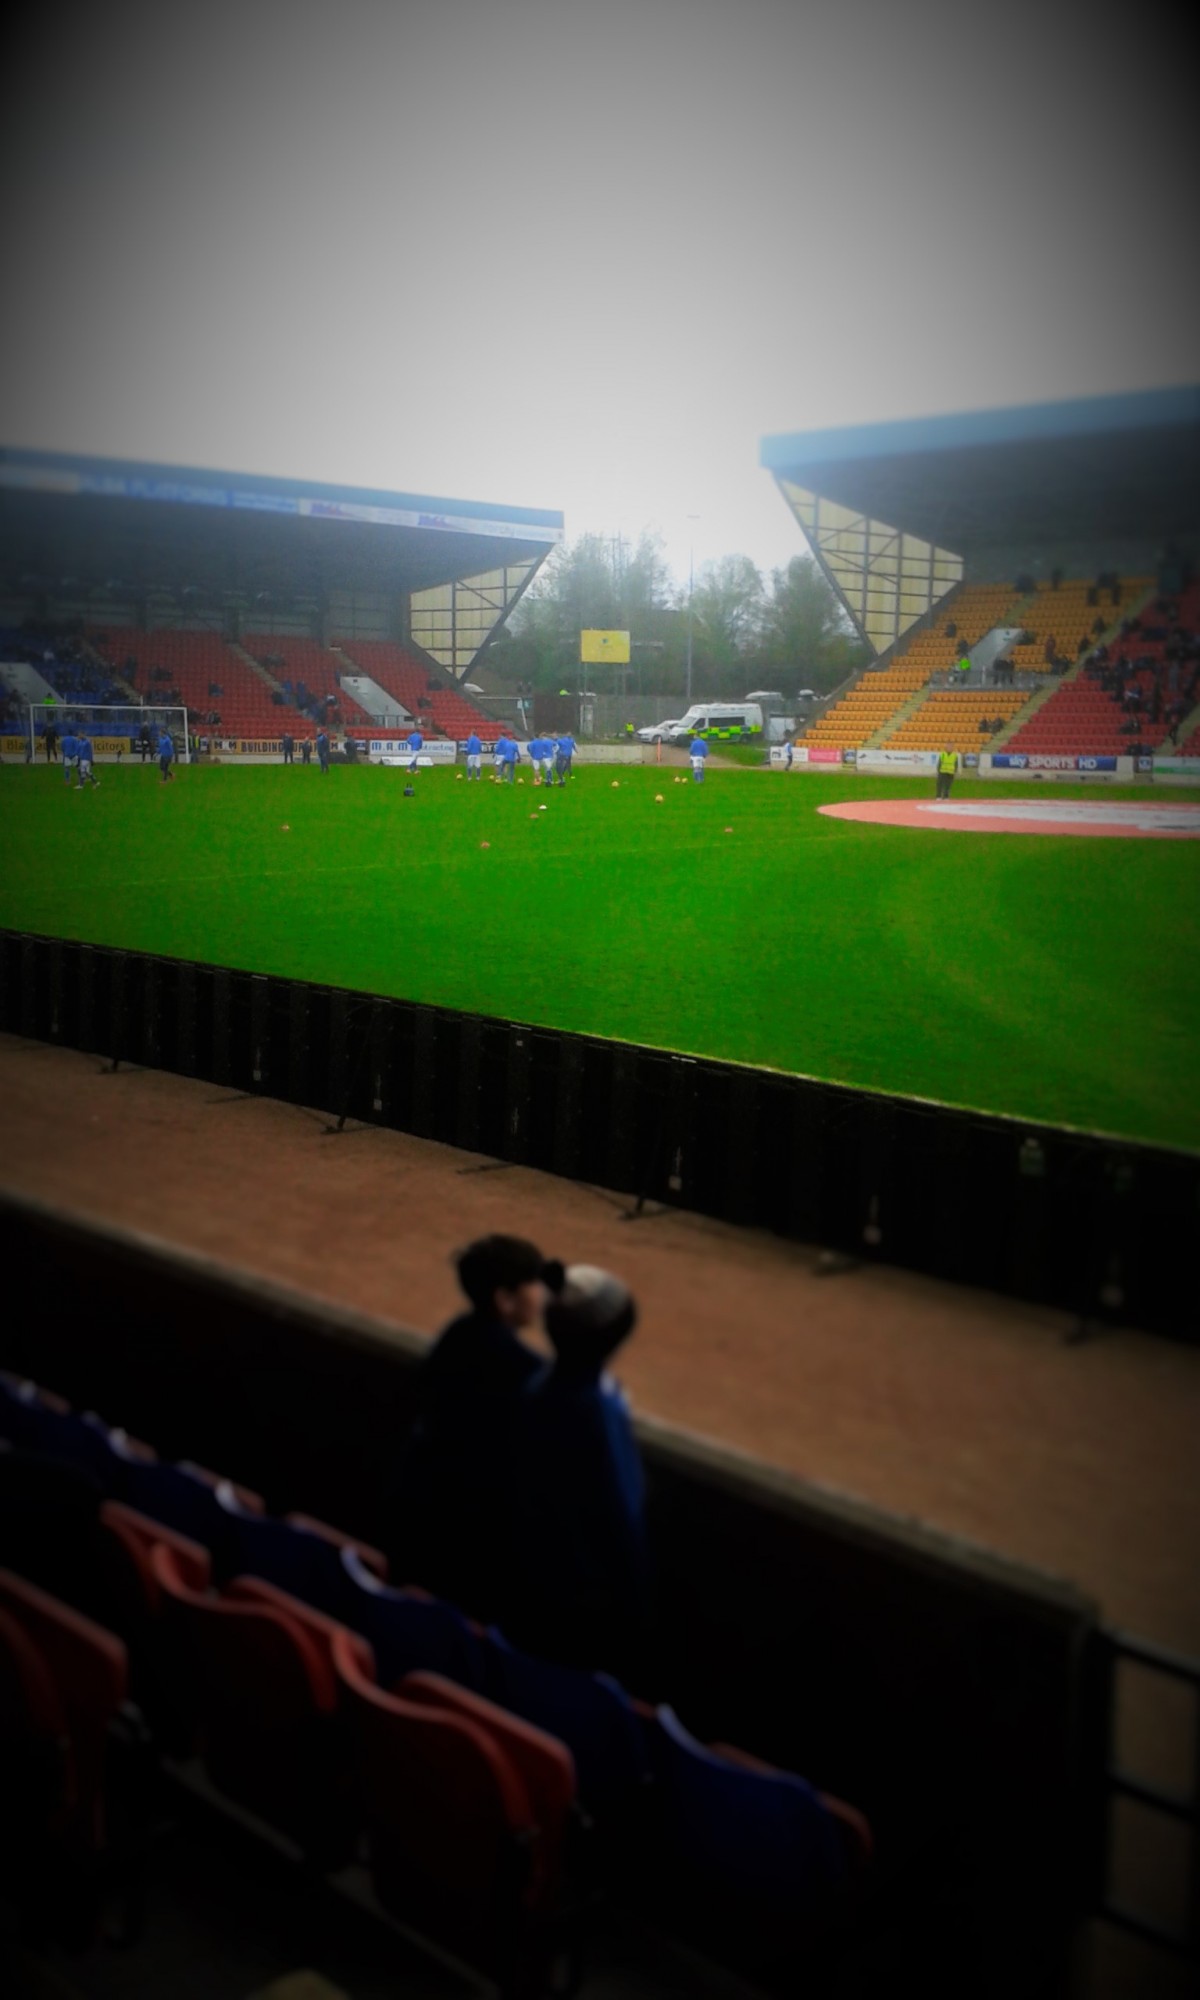 Go to McDiarmid to see the best football team in the world play.